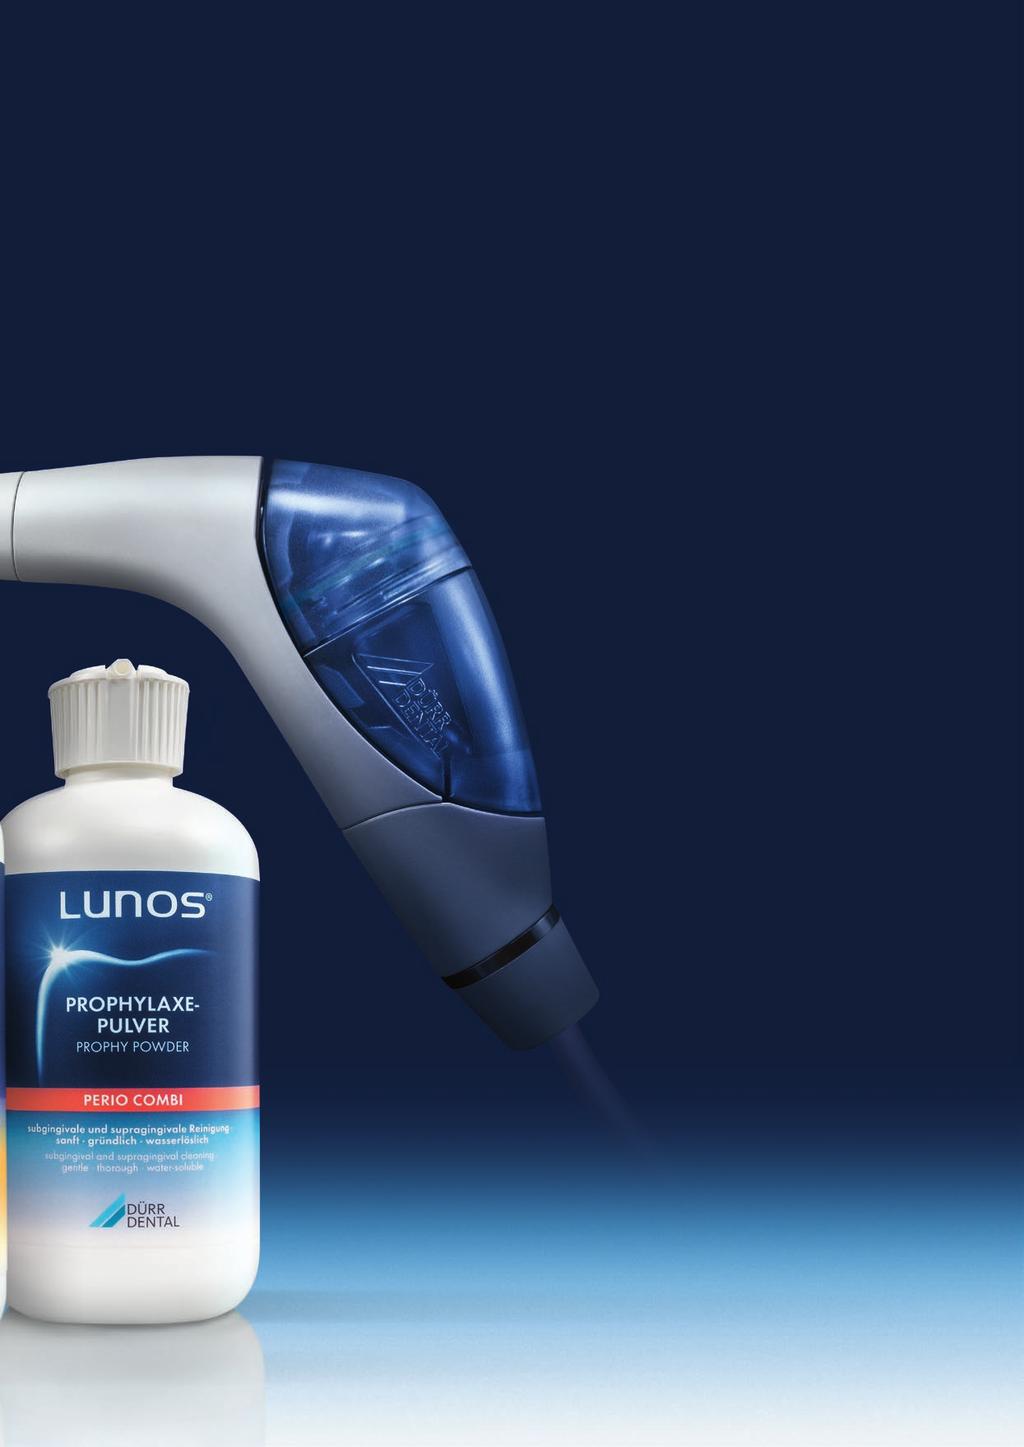 MAKING SMILES BRIGHTER: THE DENTIST Our Lunos products meet the highest medical requirements in terms of product performance and ingredients.